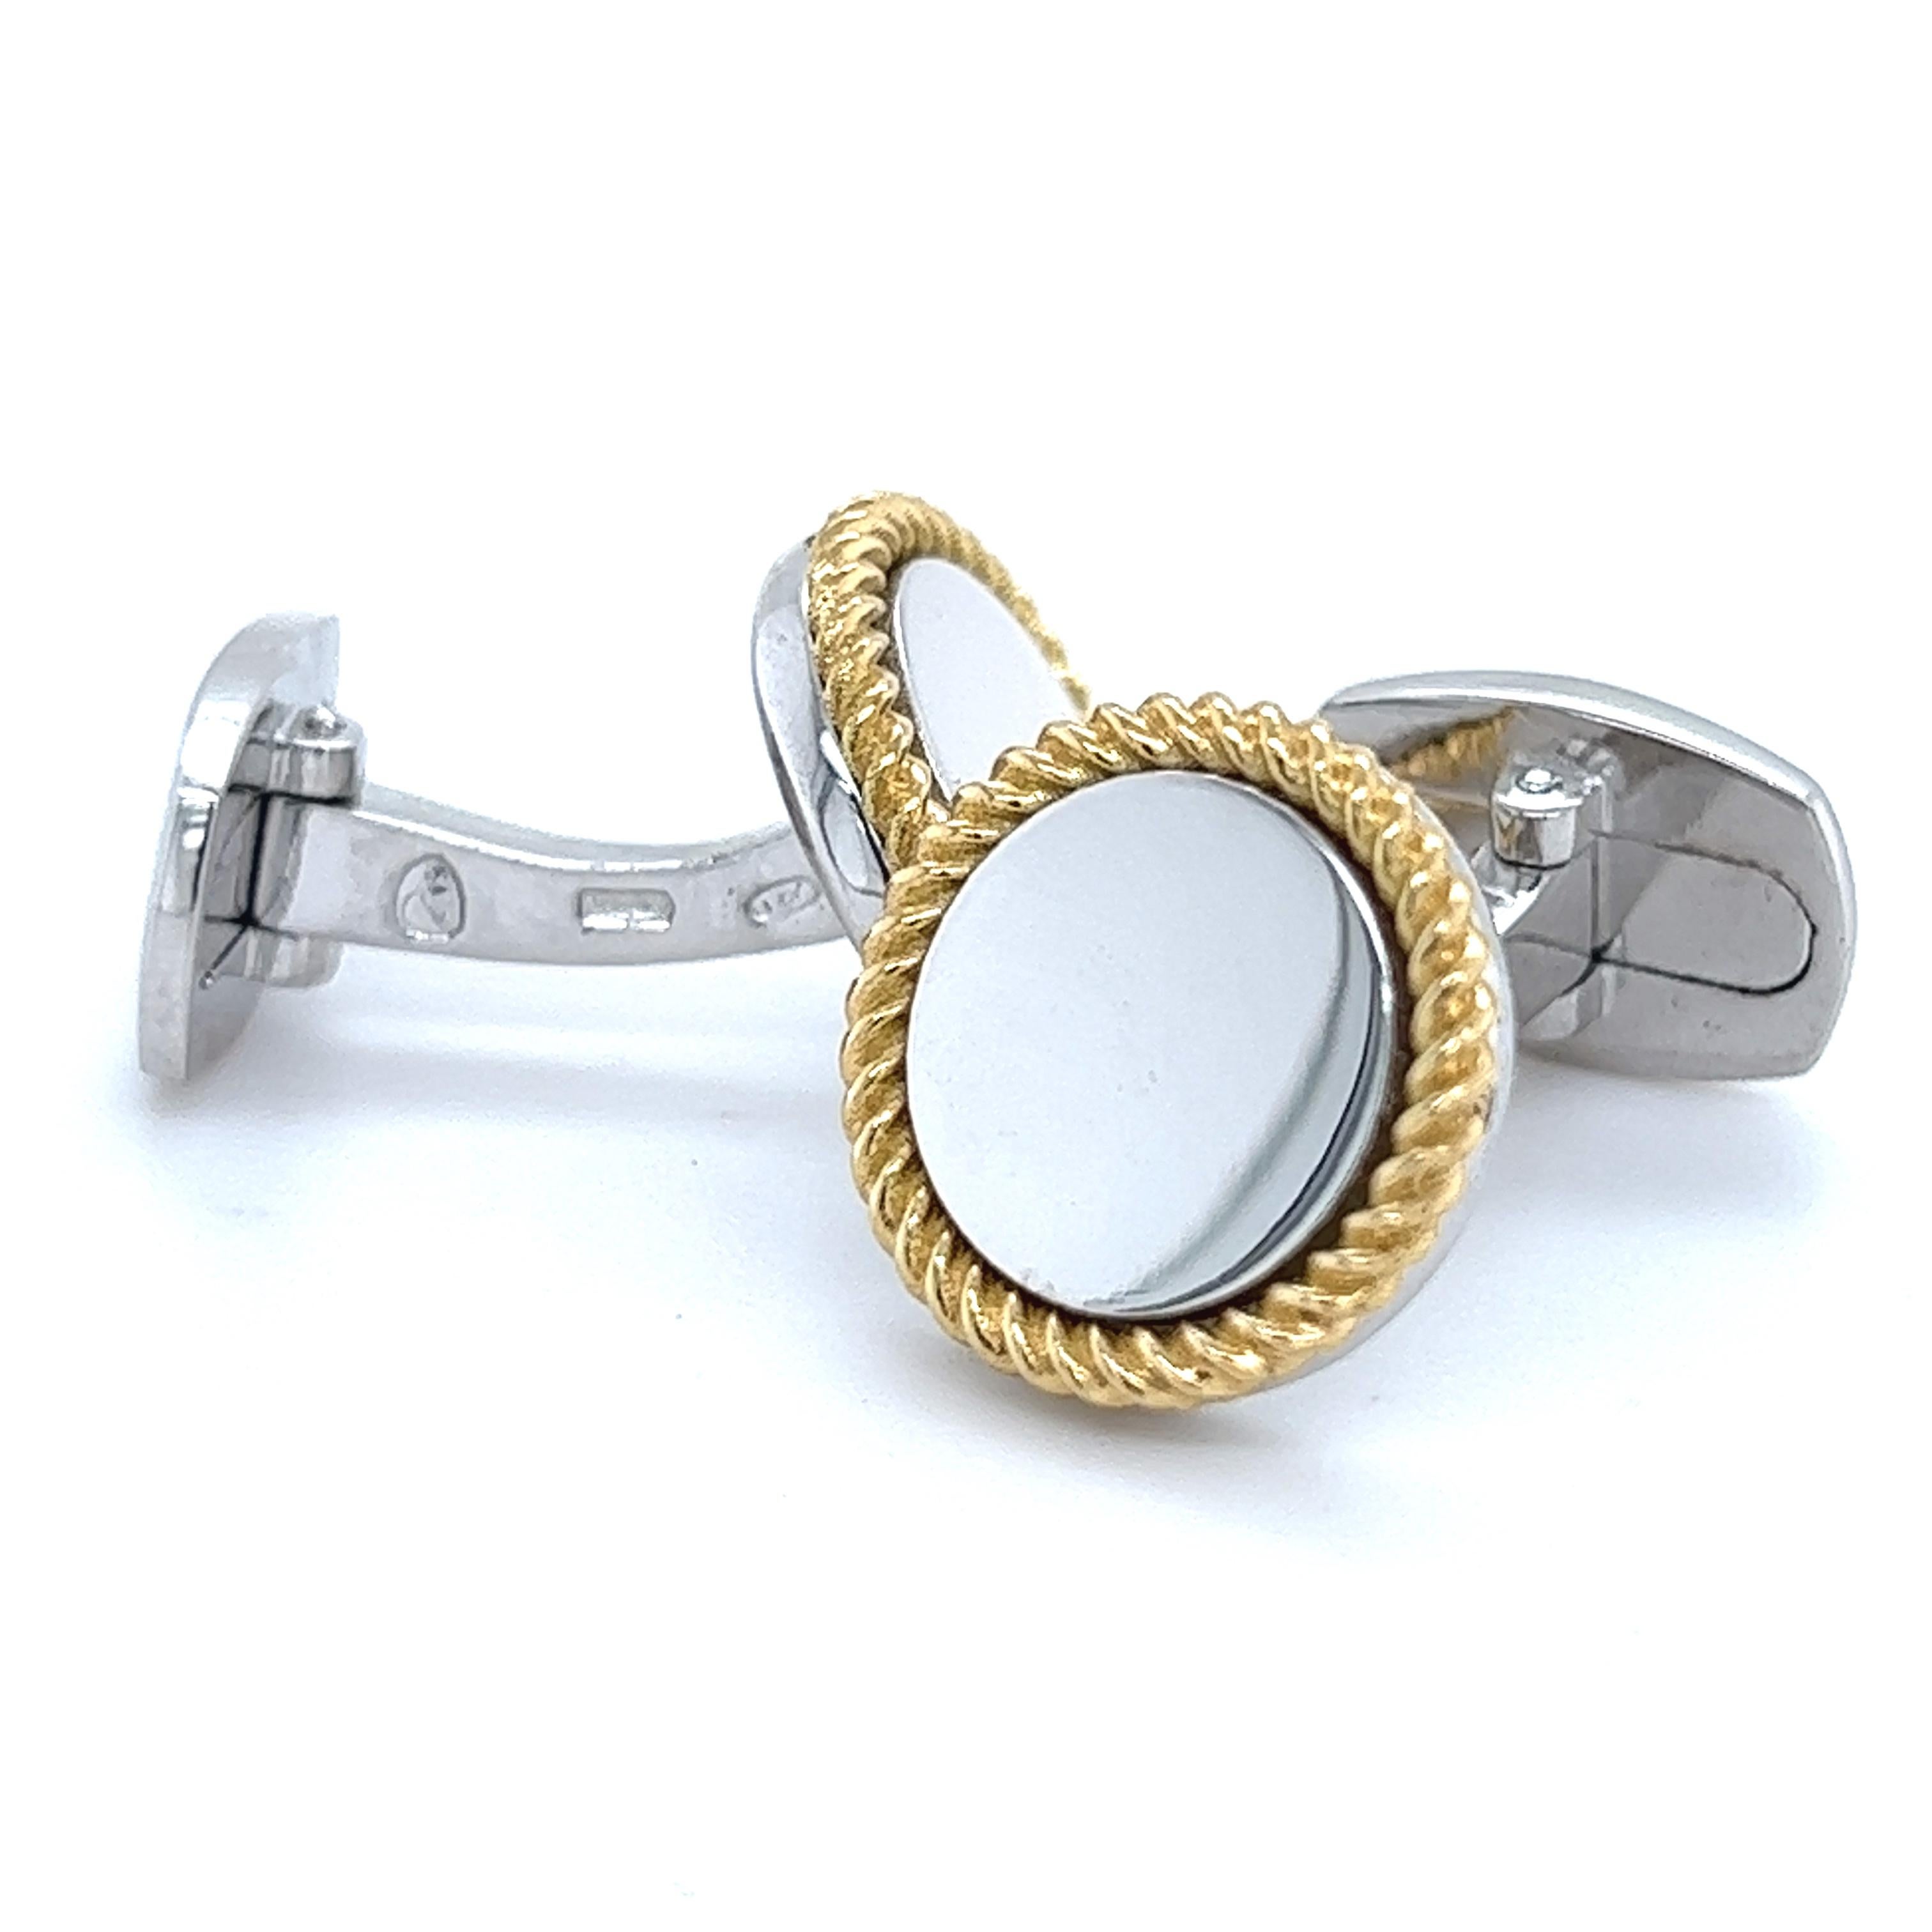 Chic and Timeless, Round Mirror Finish Disk in a 18k Yellow Gold Woven Contour, Sterling Silver Setting Cufflinks, T-bar back.
In our smart, fitted Suede Leather Case and pouch.
.
